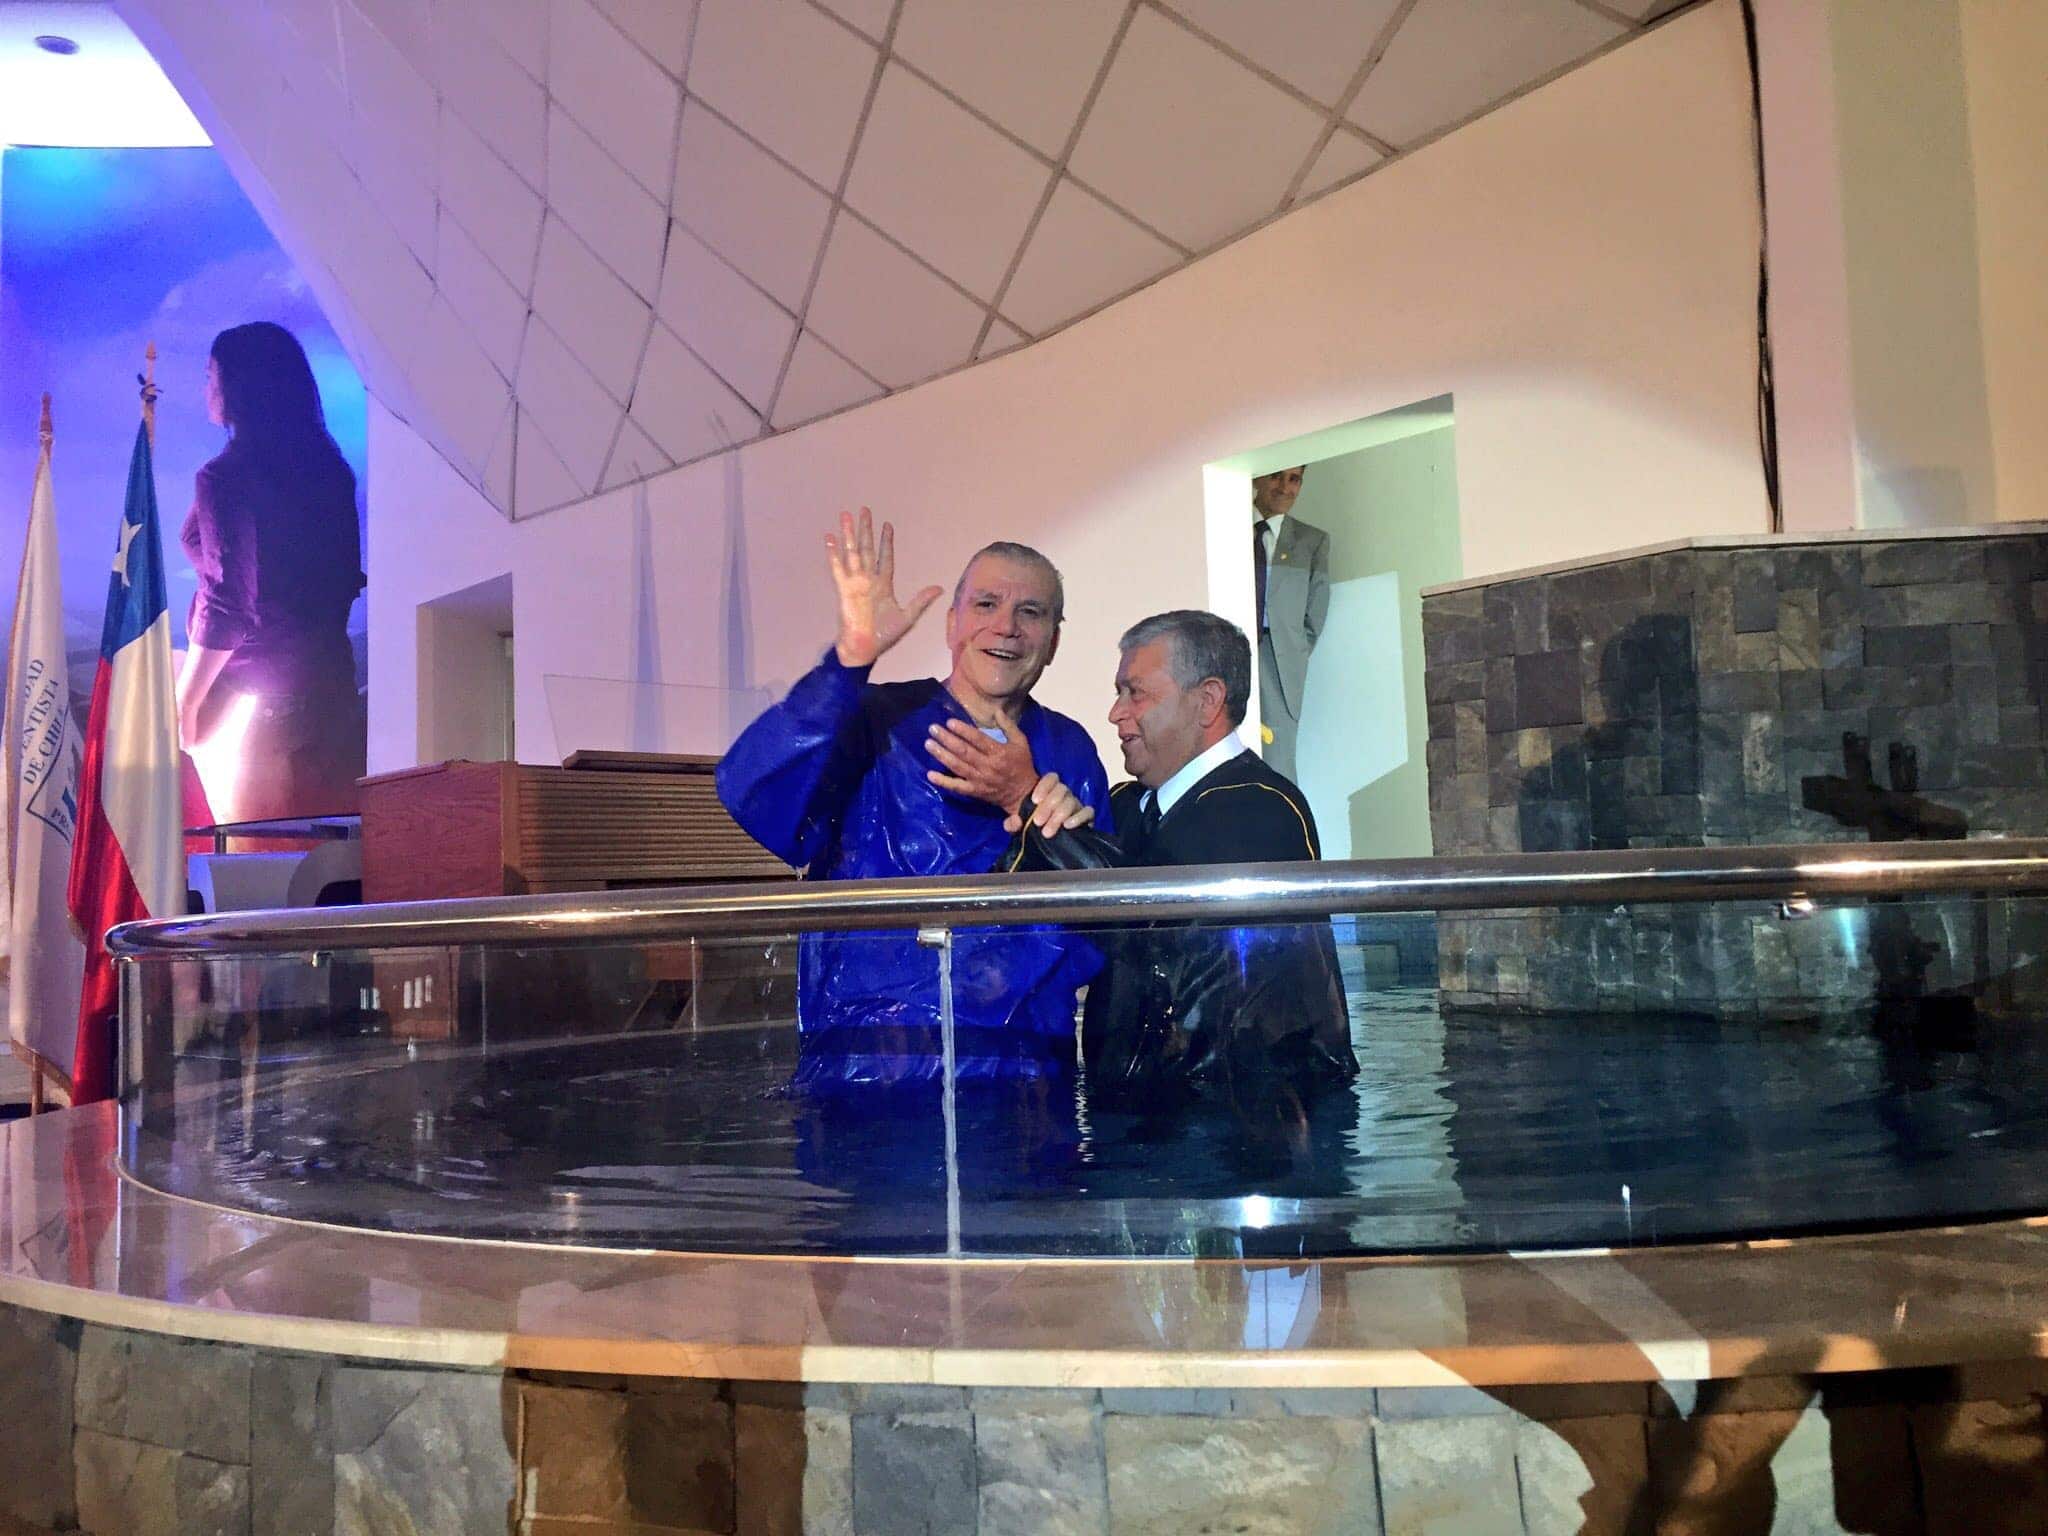 Francisco Rozas Bravo after his baptism. The former philosophy professor chose to join the Seventh-day Adventist Church after a center of influence offered classes nearby.  Photo: ASN News